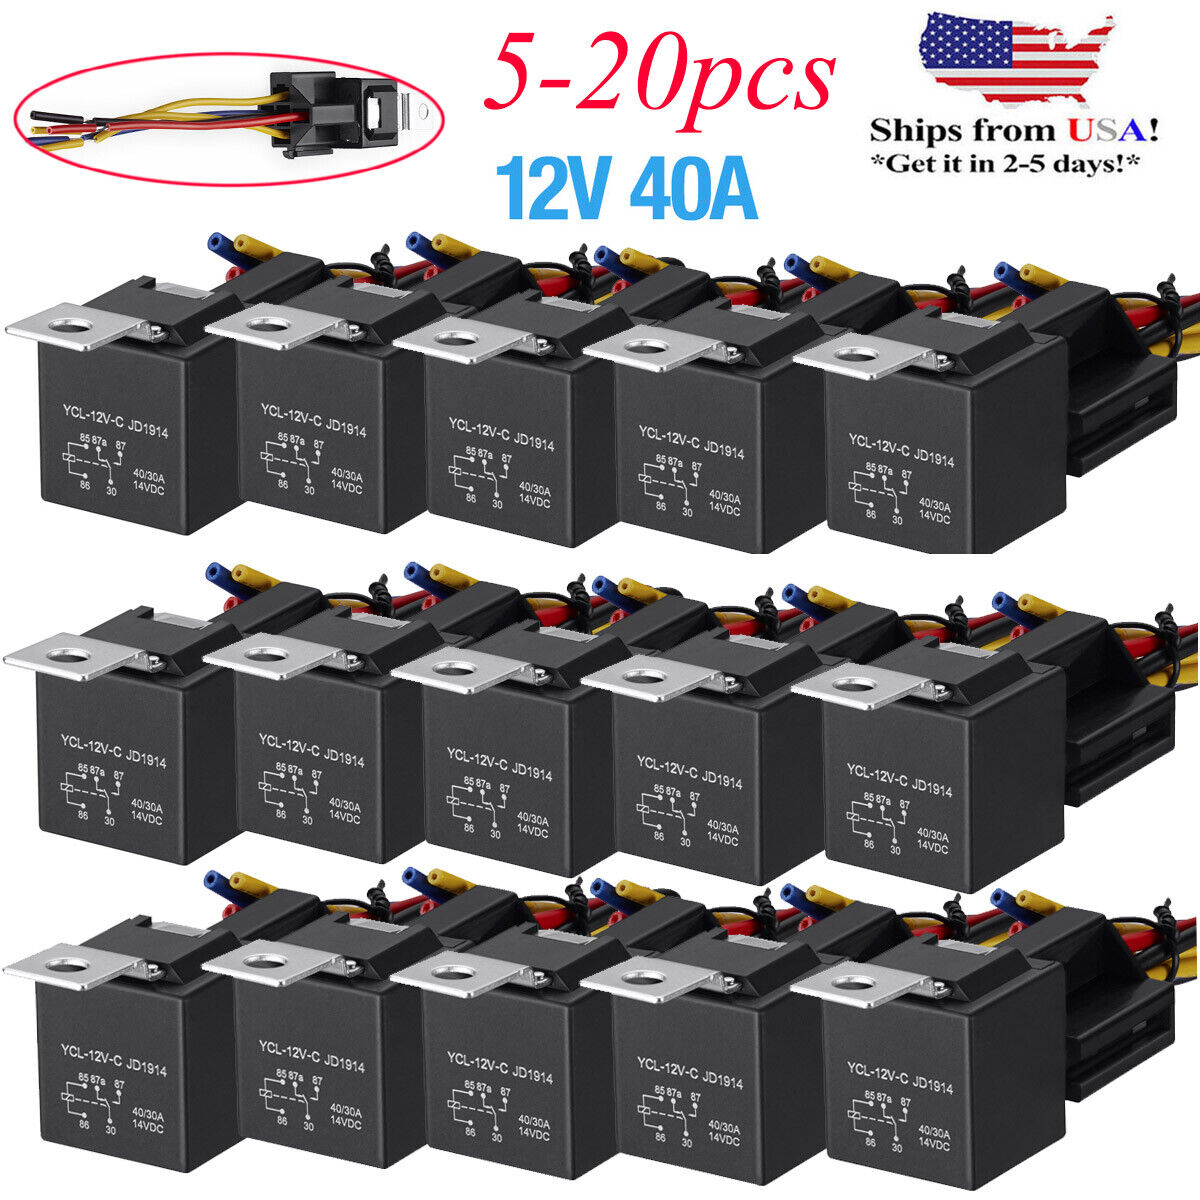 Lots 12V 30/40 Amp 5-Pin SPDT Automotive Relay with Wires & Harness Socket Set U